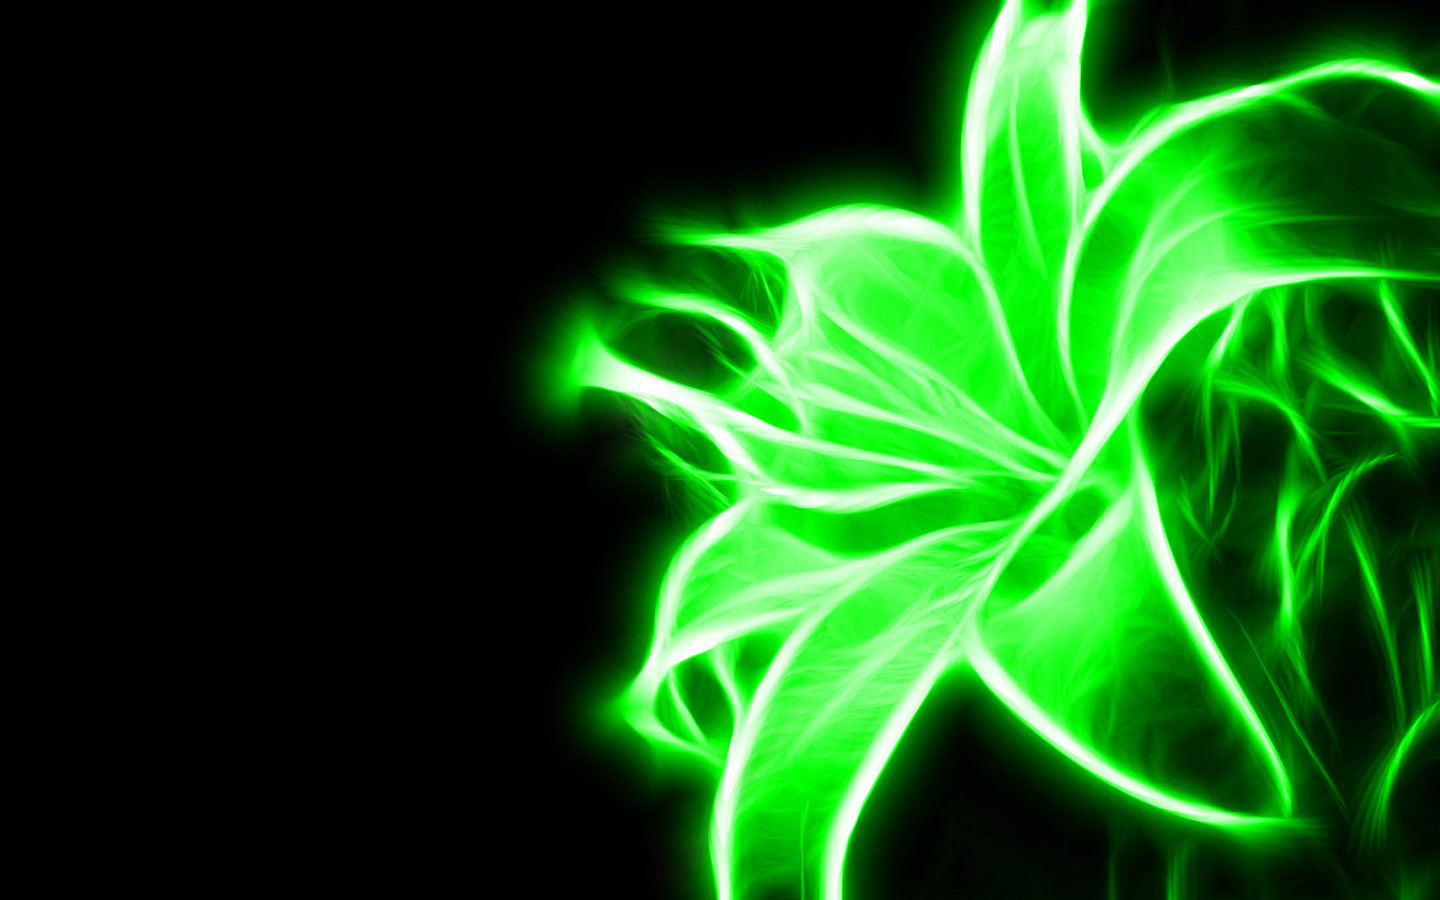 Neon Green And Black Aesthetic Wallpapers - Wallpaper Cave